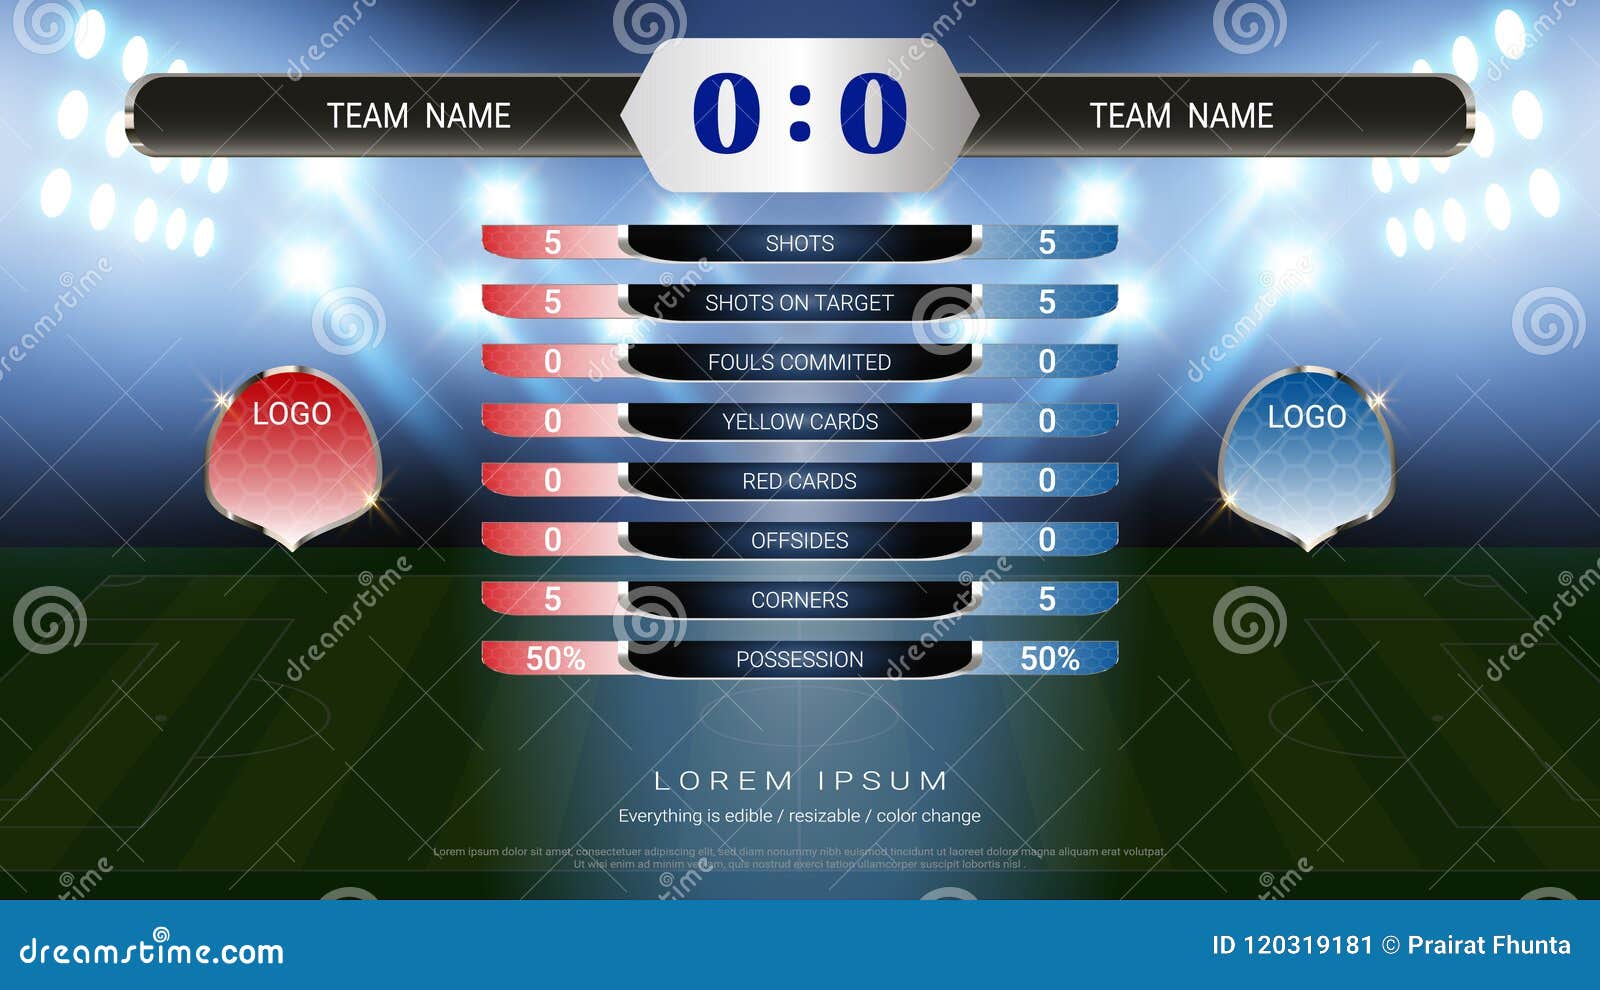 Football Scoreboard Team a Vs Team B and Global Stats Broadcast Graphic Soccer Template, for Your Presentation of the Match Result Stock Vector